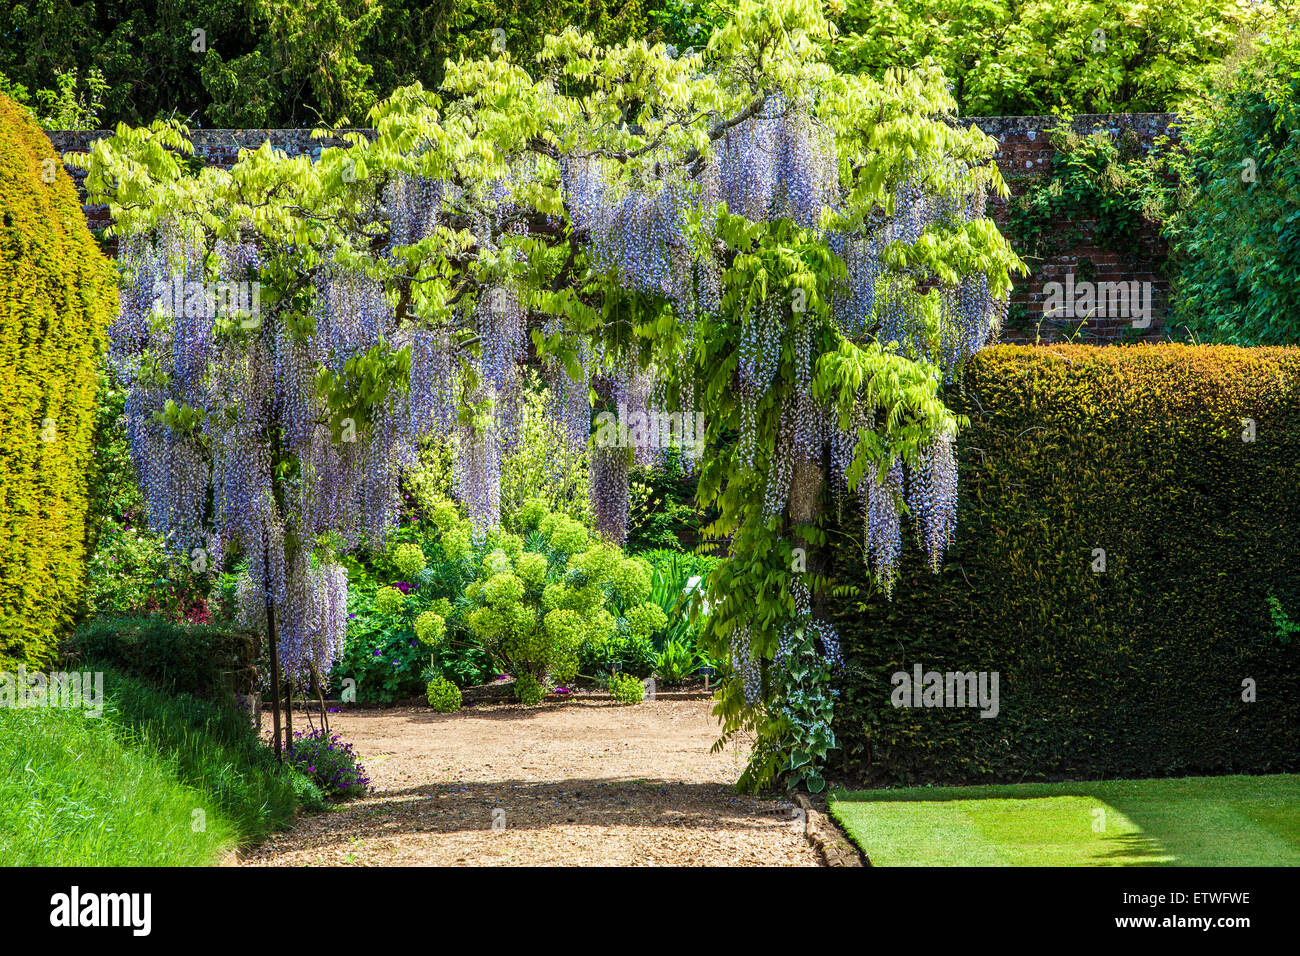 Blue flowering Chinese wisteria sinensis in the walled garden of Bowood House in Wiltshire. Stock Photo